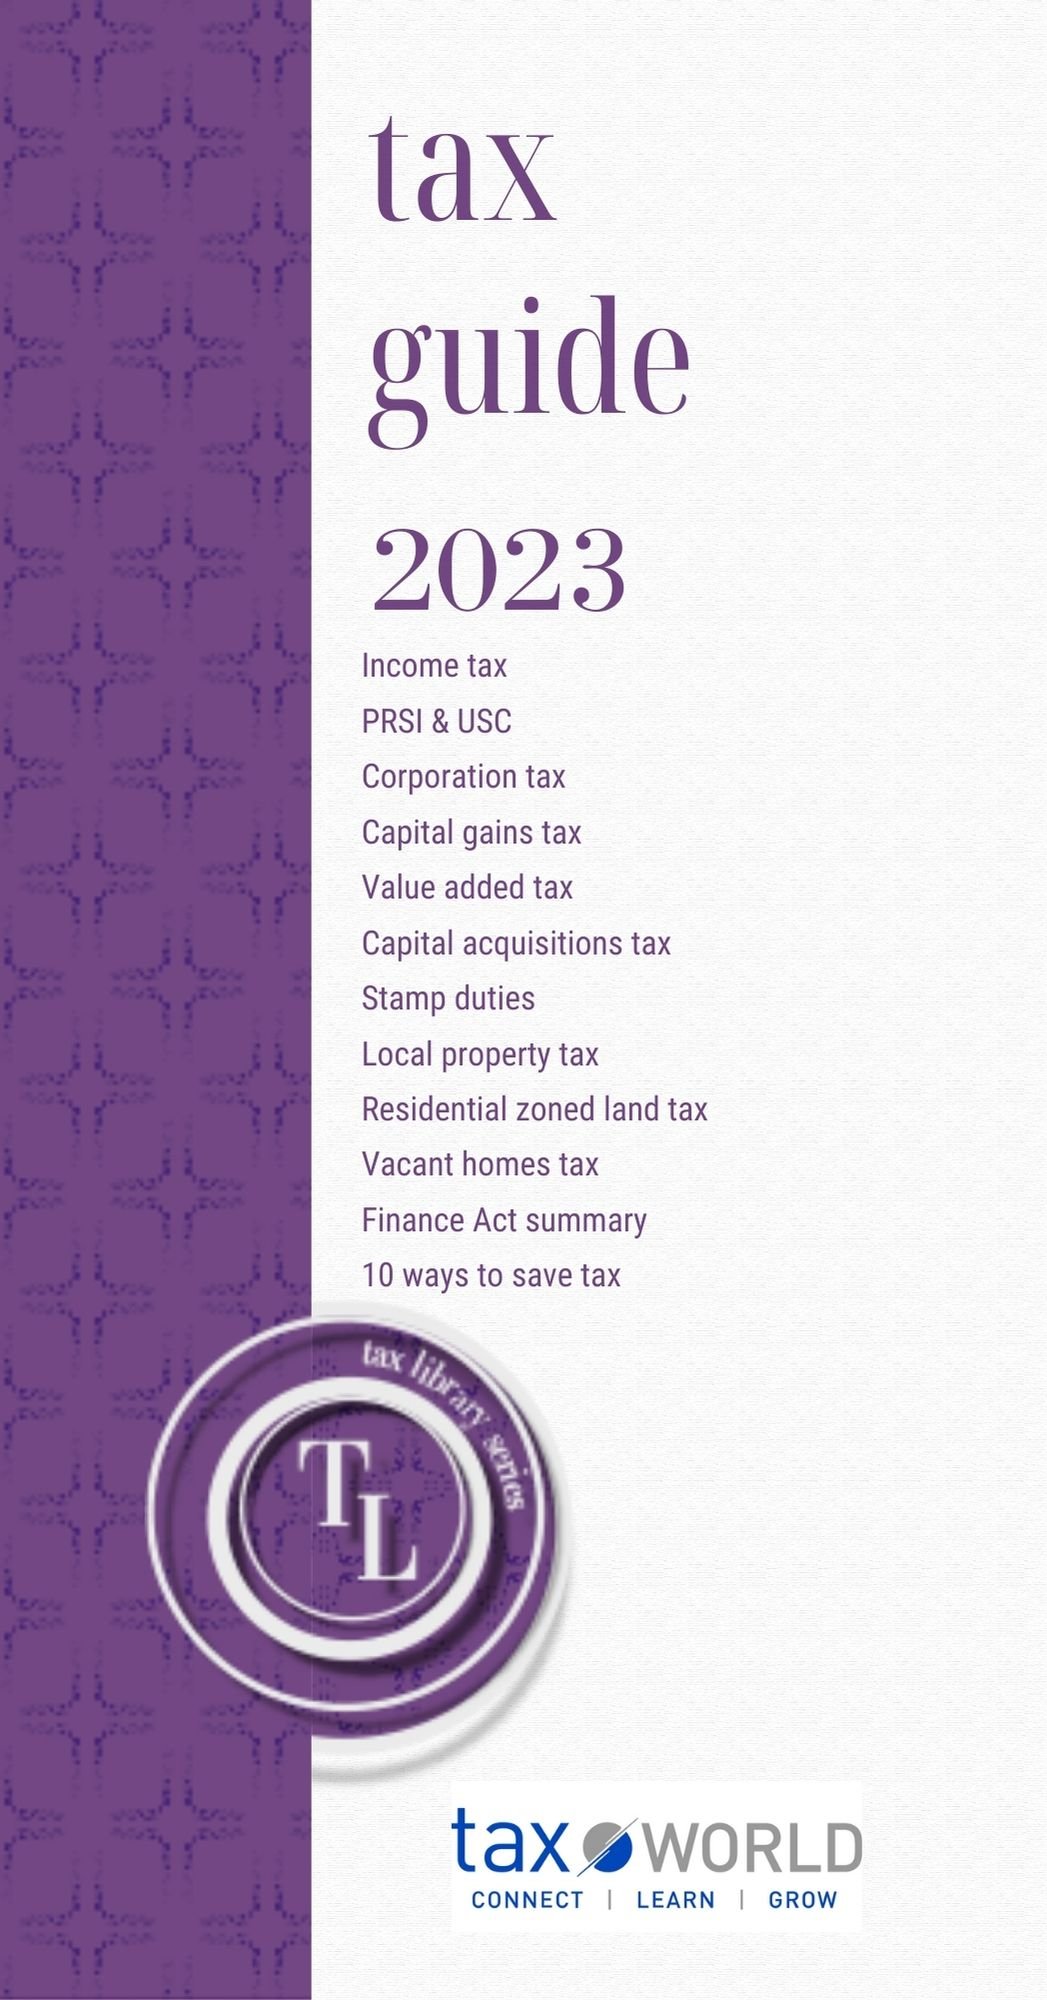 Tax guide 2023 landing page